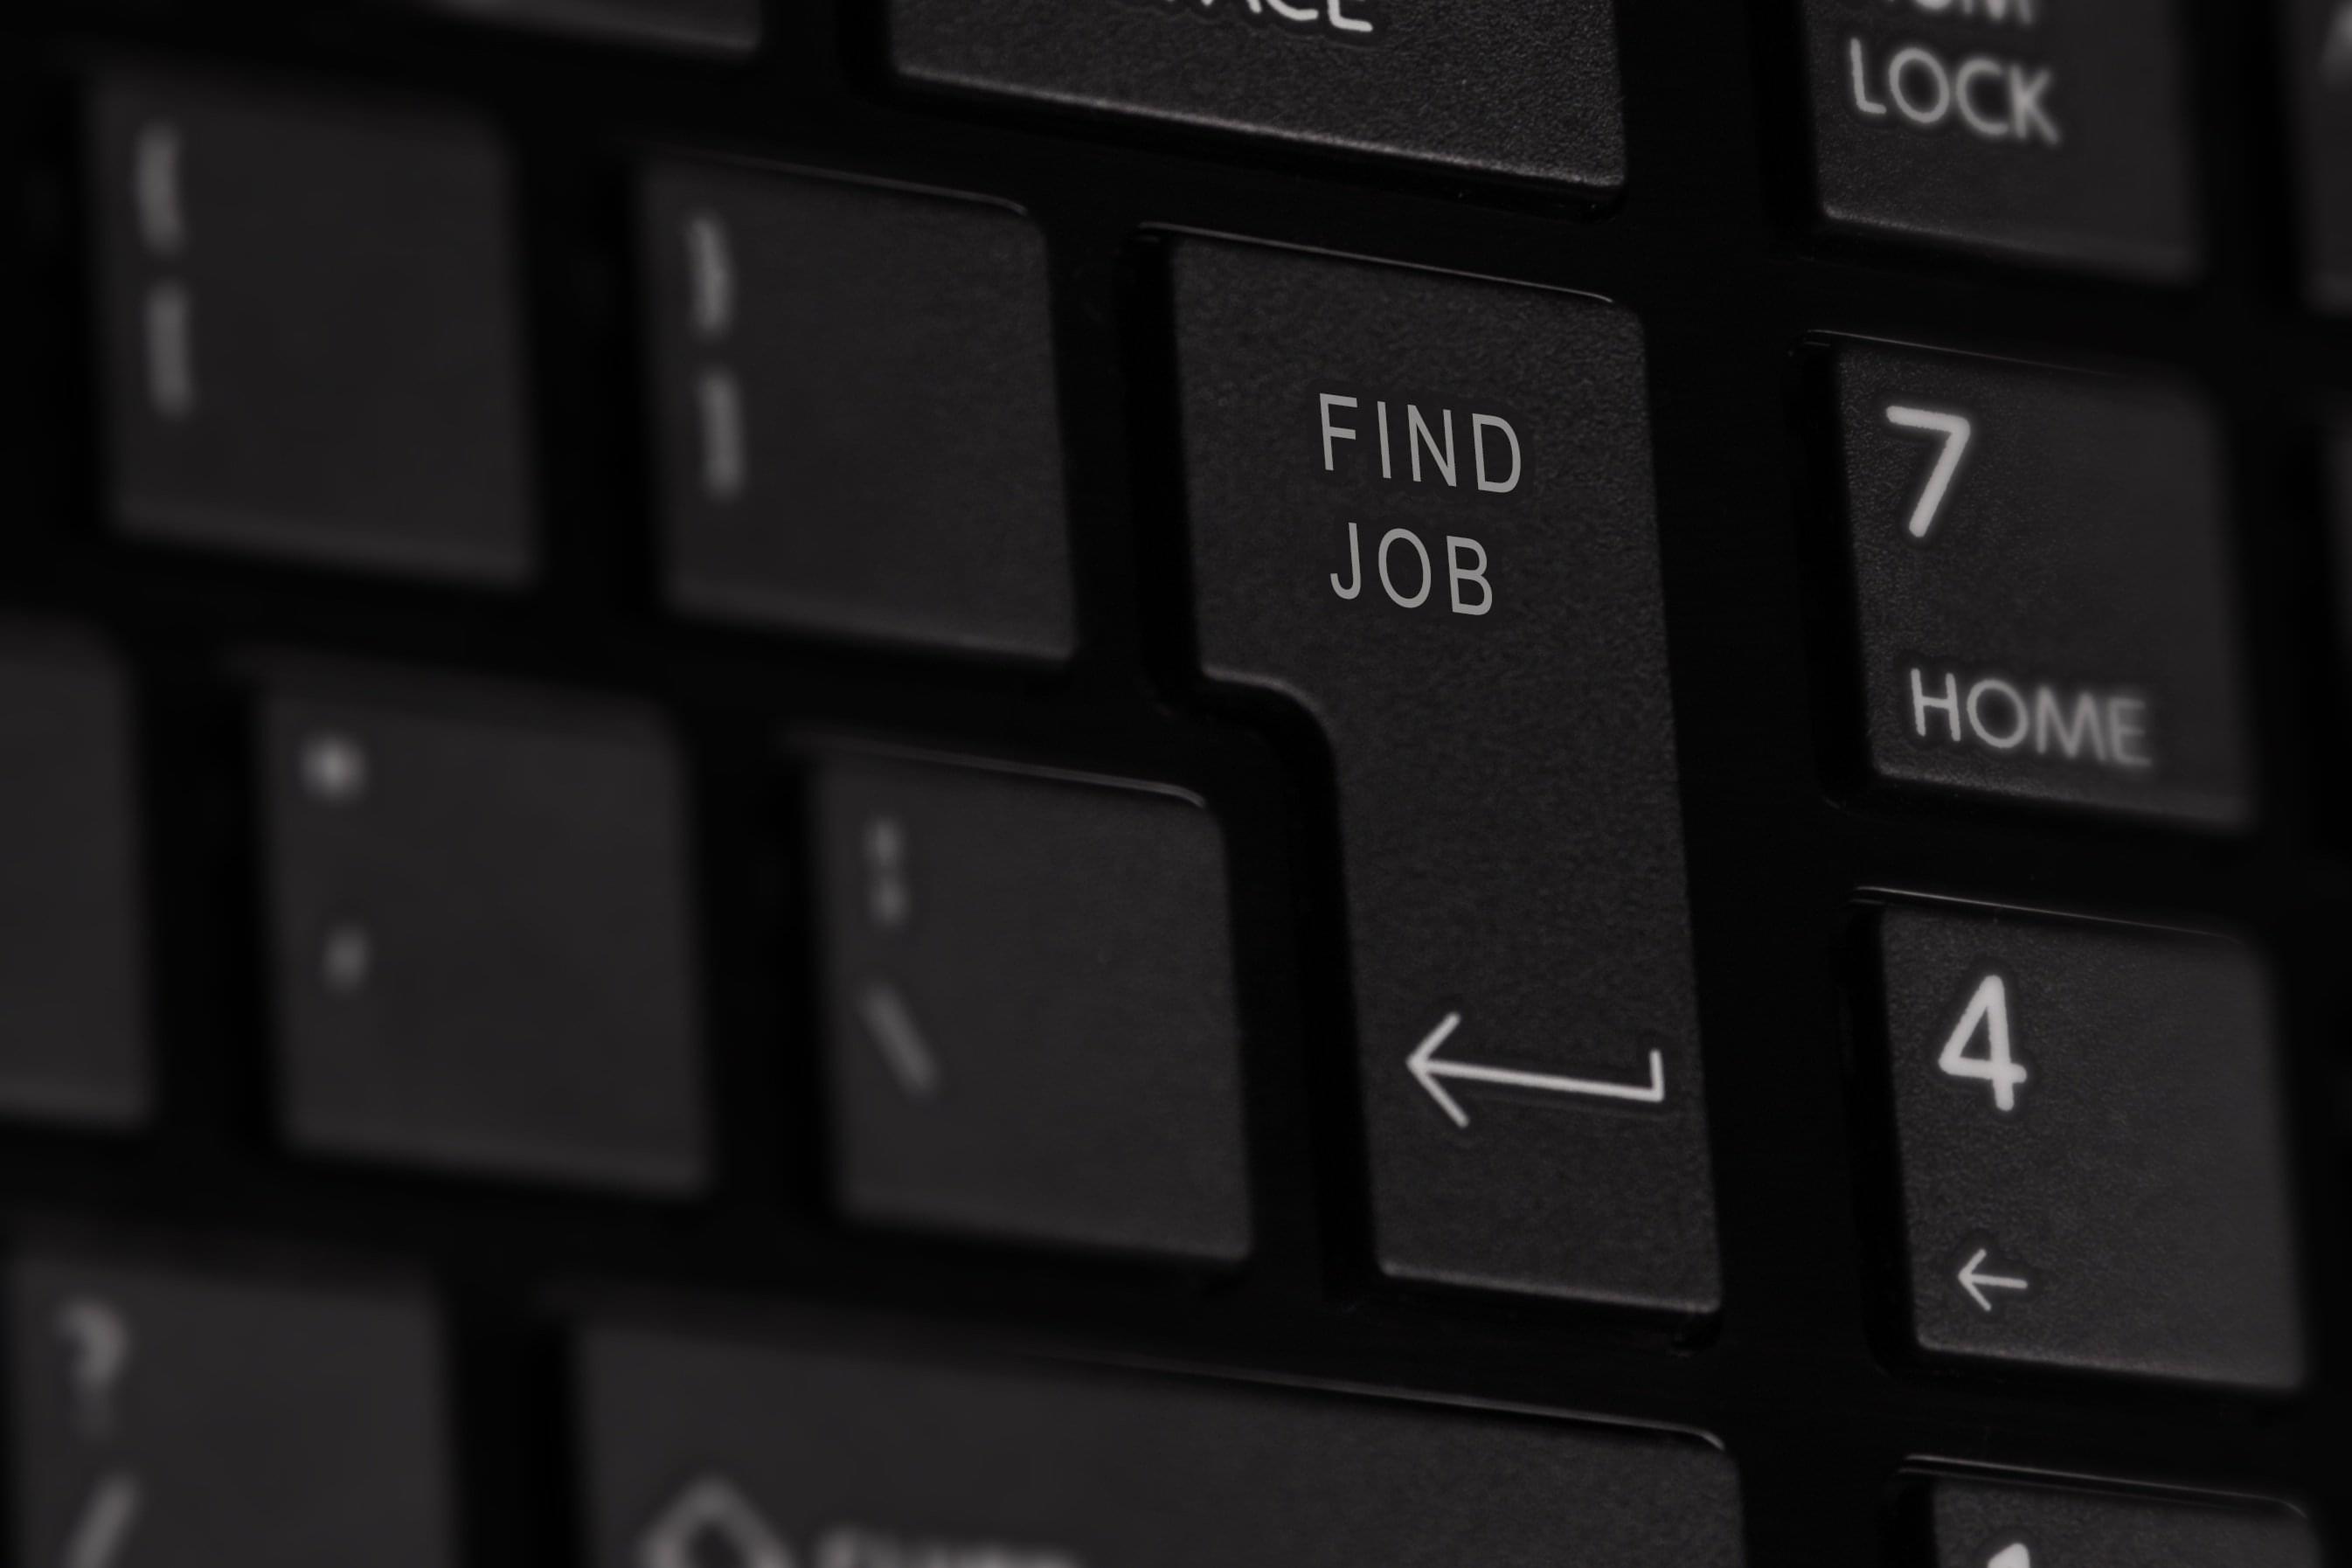 Keyboard with a Find a Job button